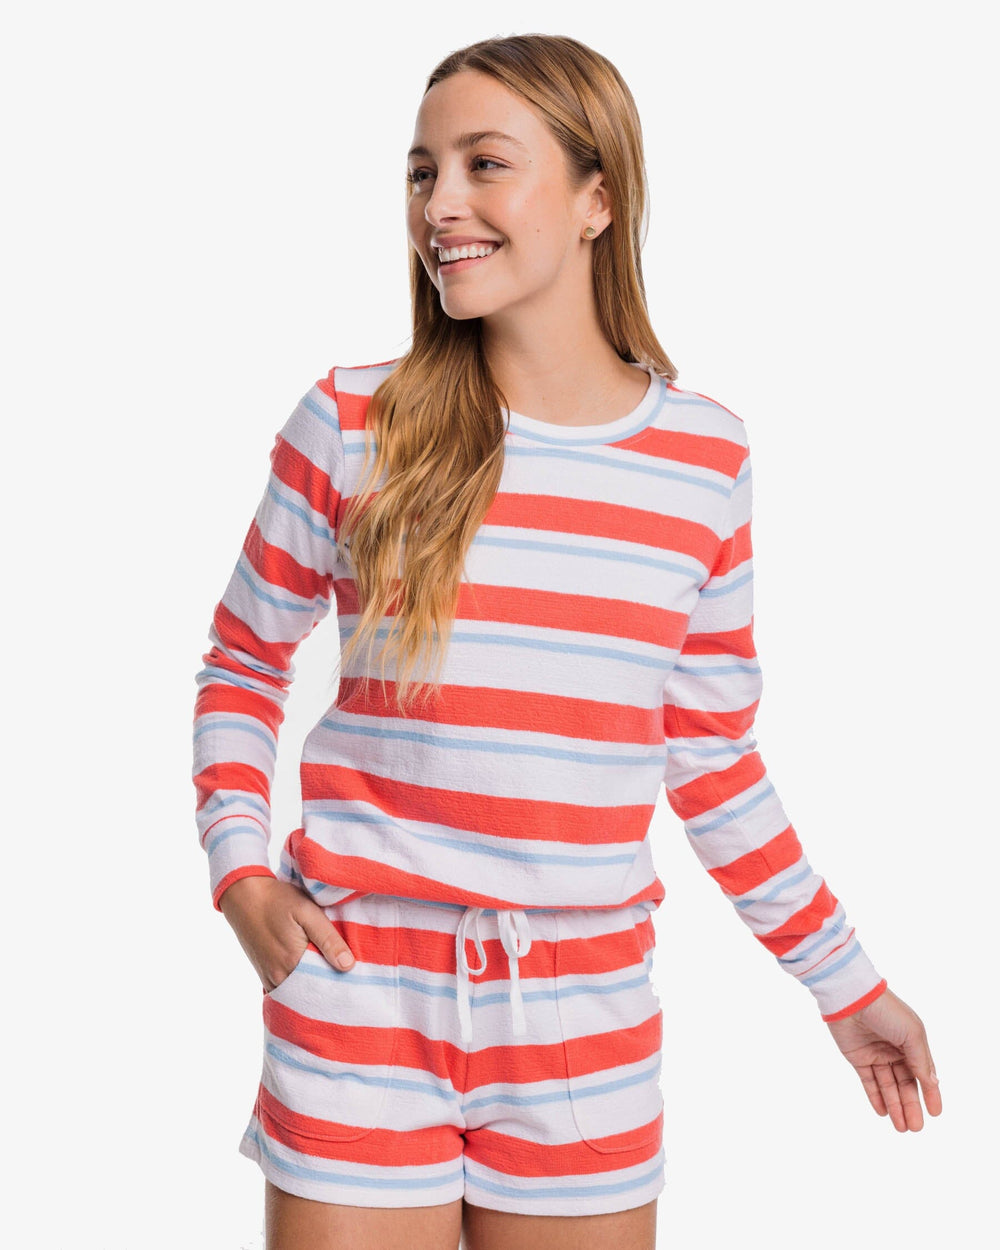 The front view of the Southern Tide Lana Beach Day Stripe Crew Neck Sweatshirt by Southern Tide - Rosewood Red